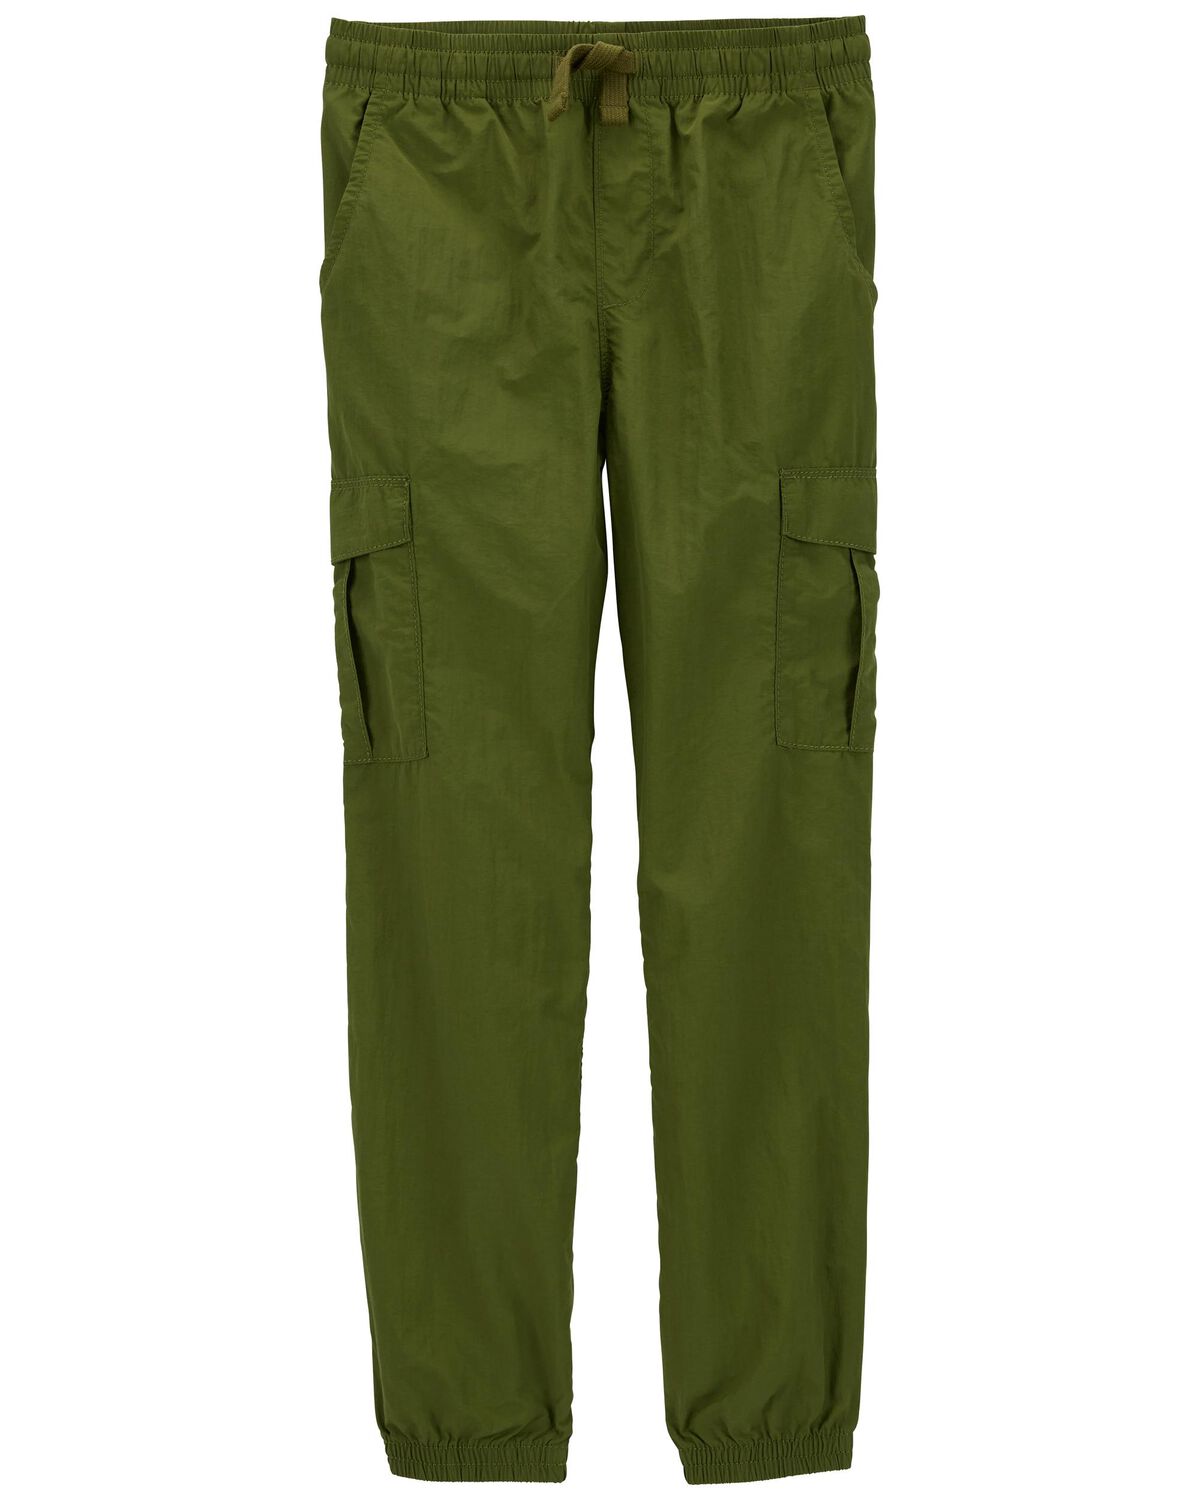 Green Kid Pull-On Active Pants | carters.com